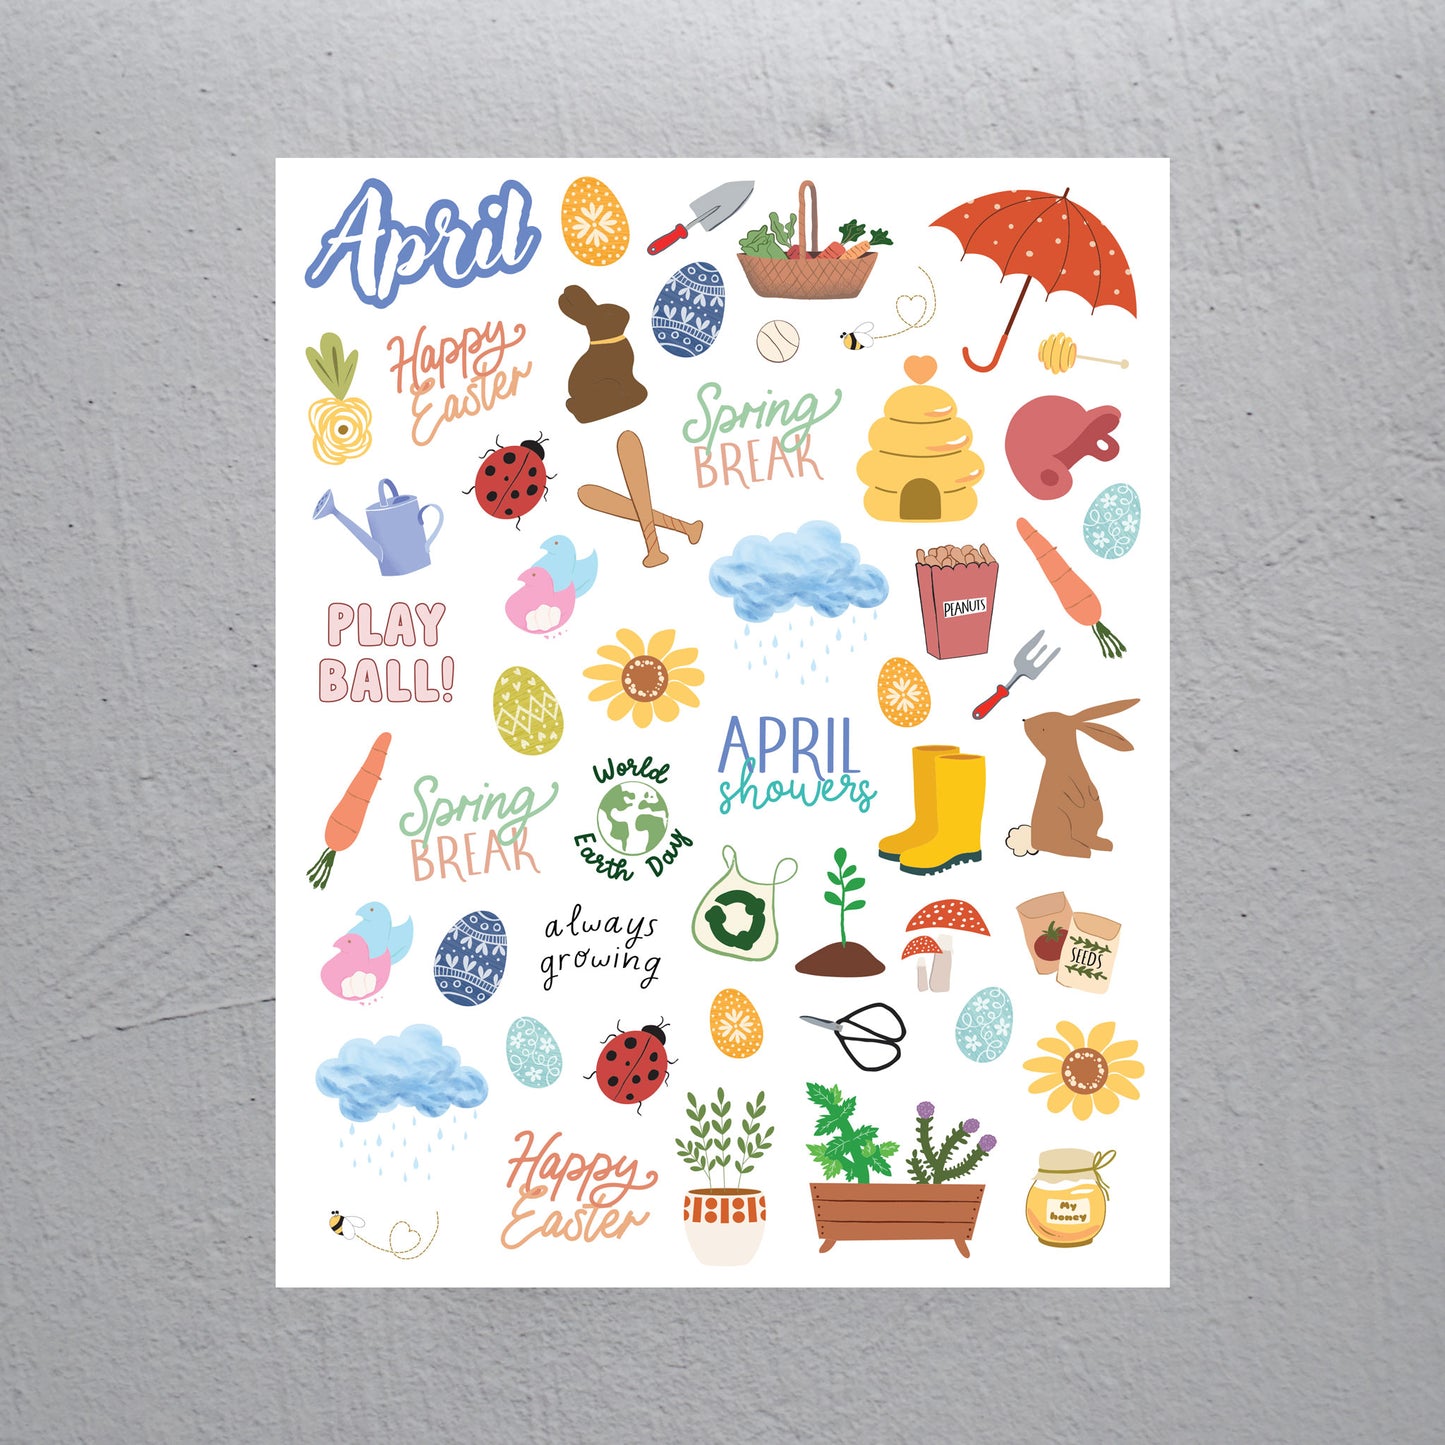 April Stickers - Assorted Monthly Themed Stickers (2 Sheets)